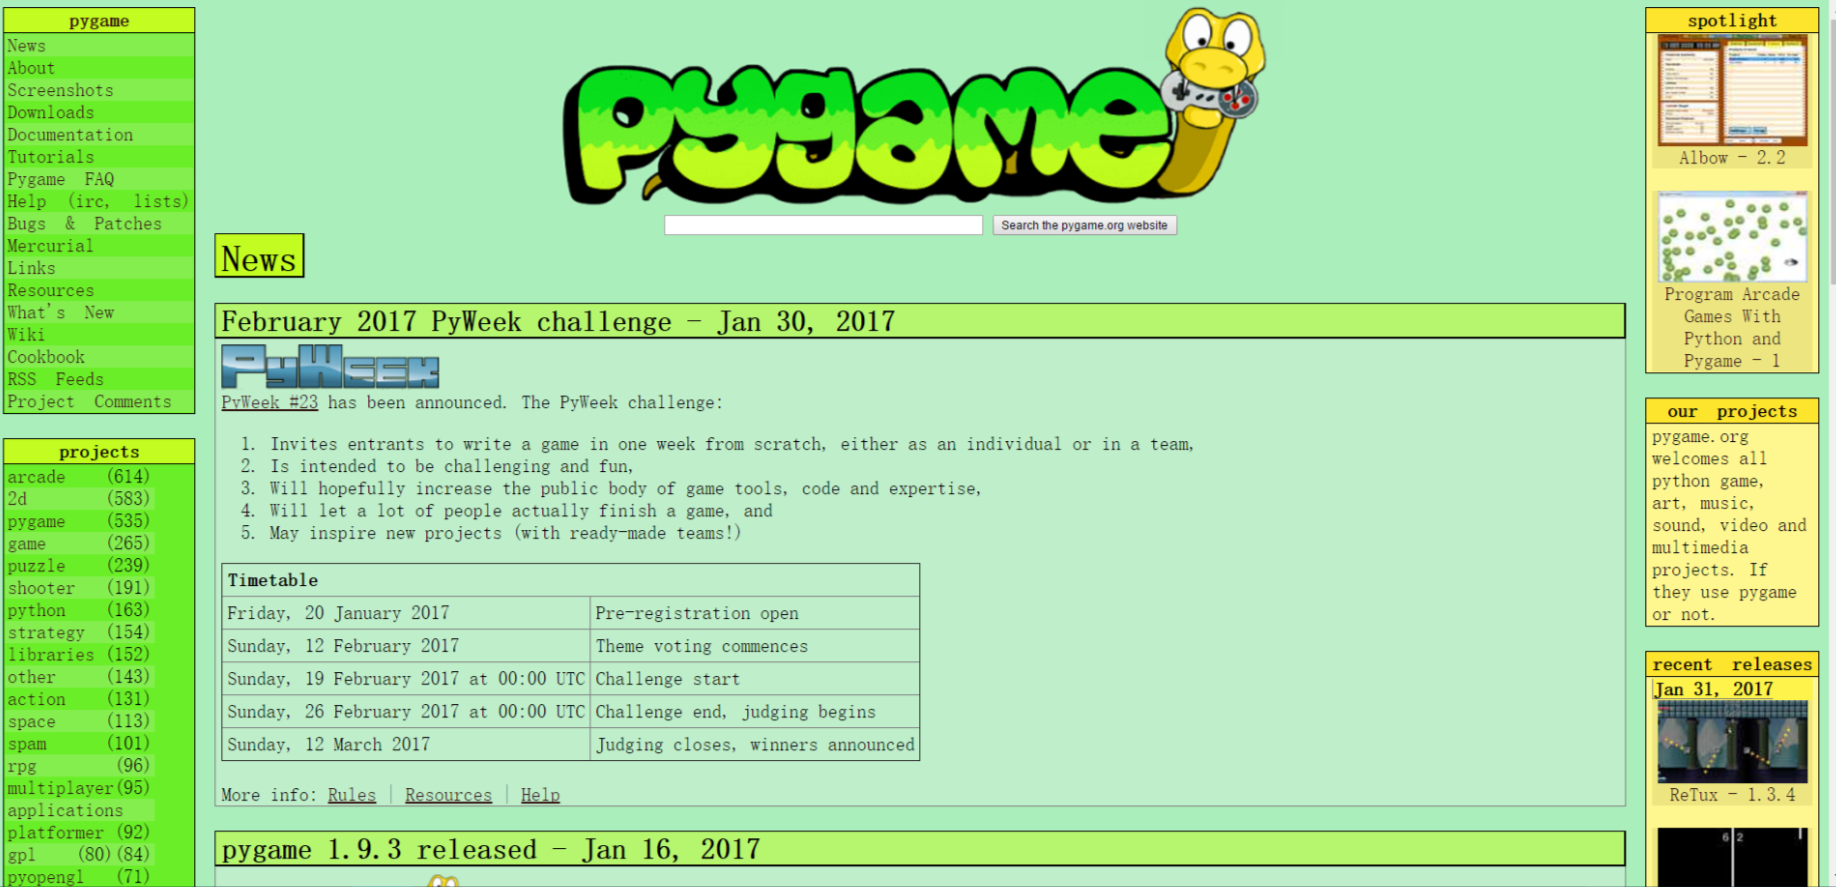 Pygame org download shtml. Библиотека Pygame. Pygame проекты. Библиотека Pygame Python. Питон Pygame.